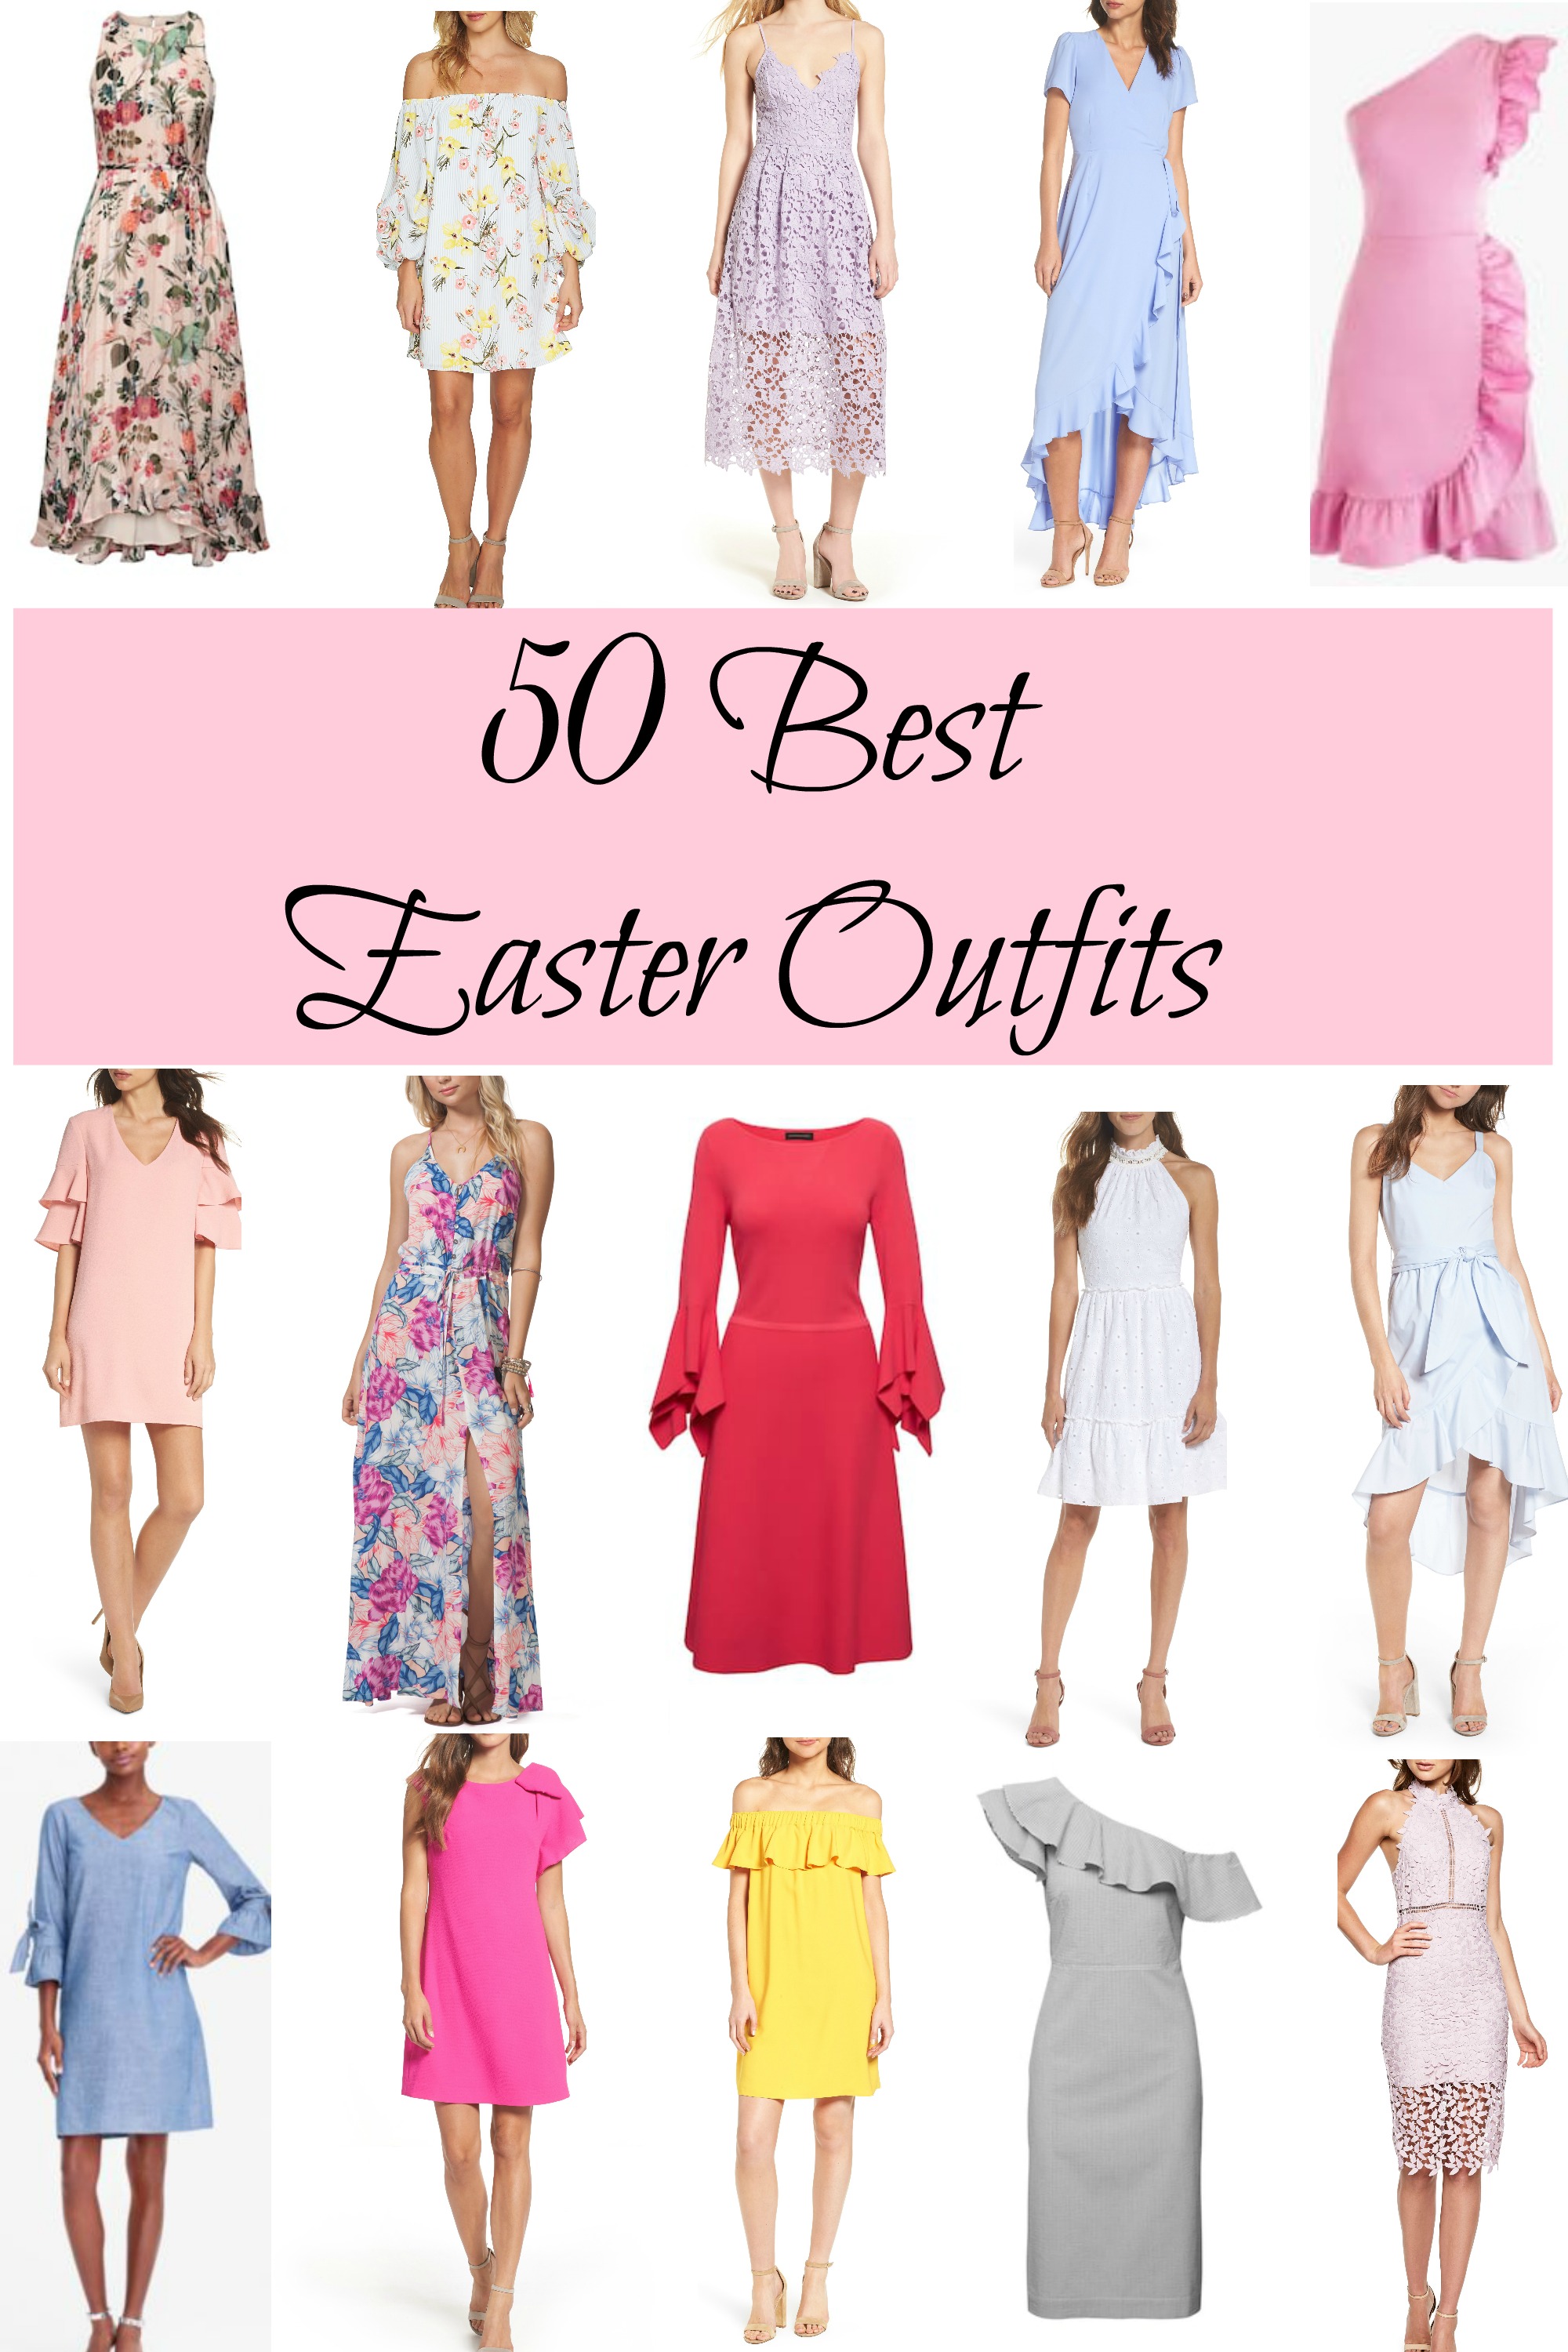 50 Best Easter Outfits Daily Dose of Style